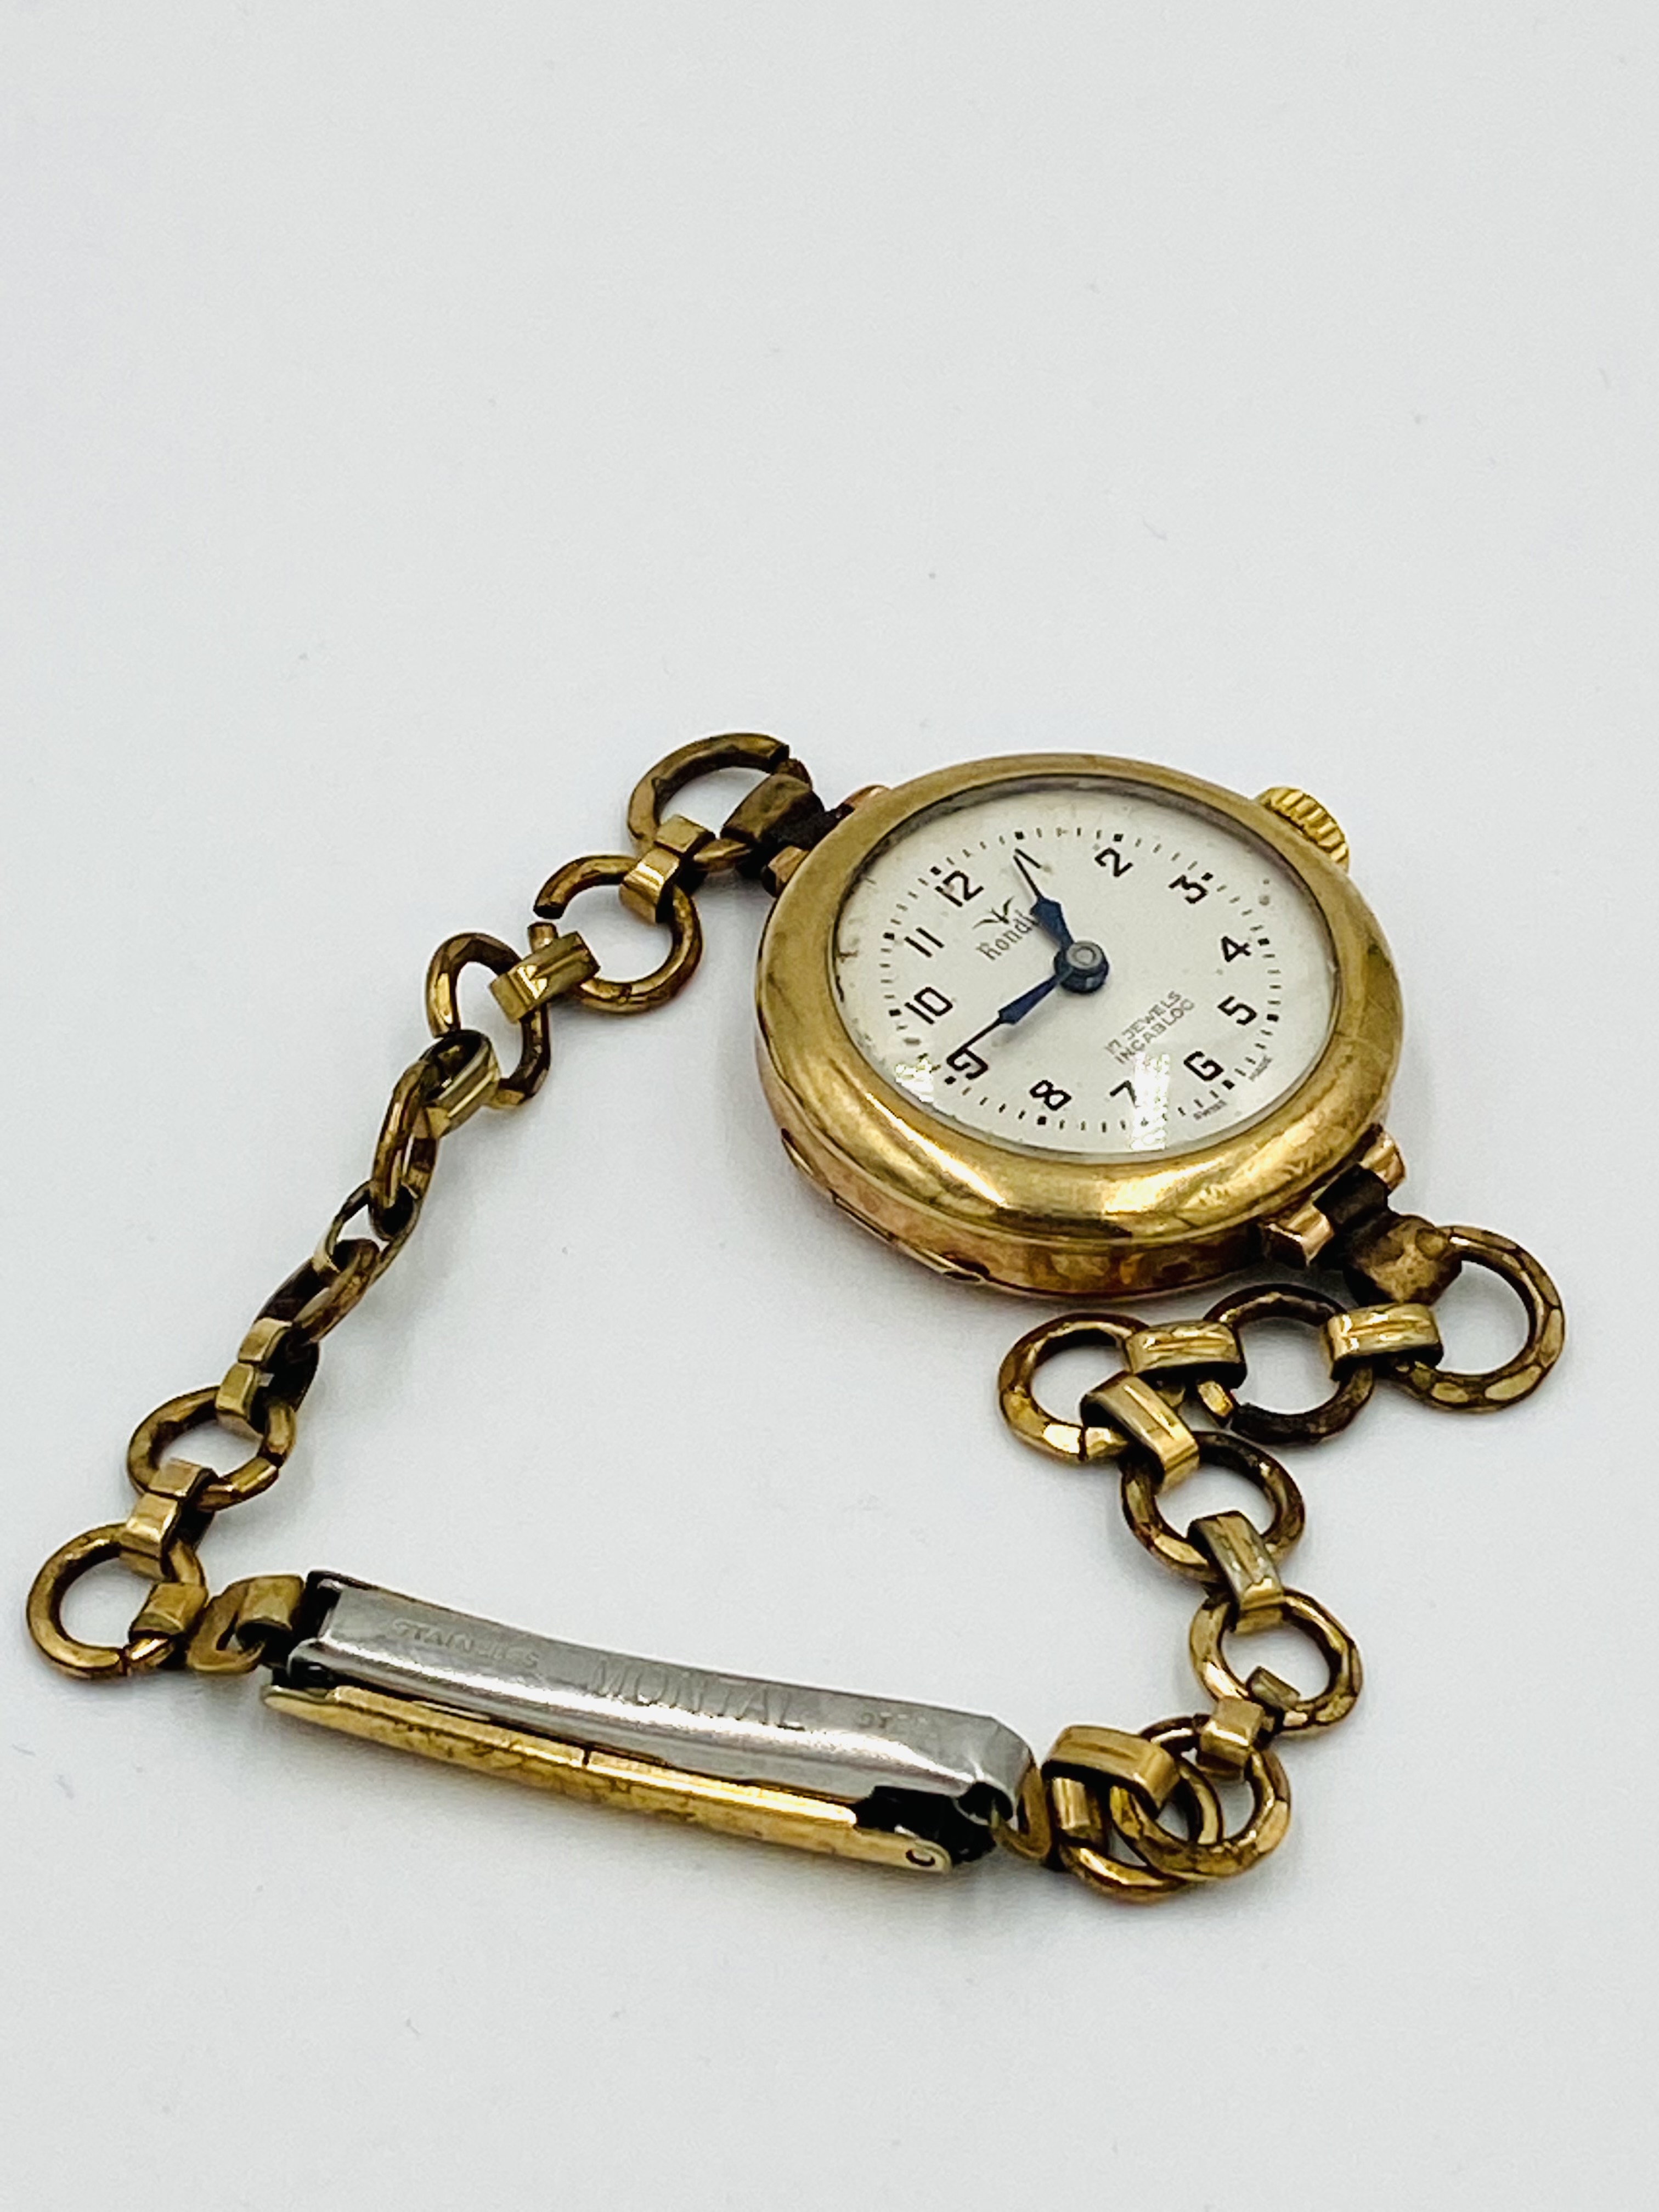 Rondine ladies wristwatch with 9ct gold case - Image 4 of 4